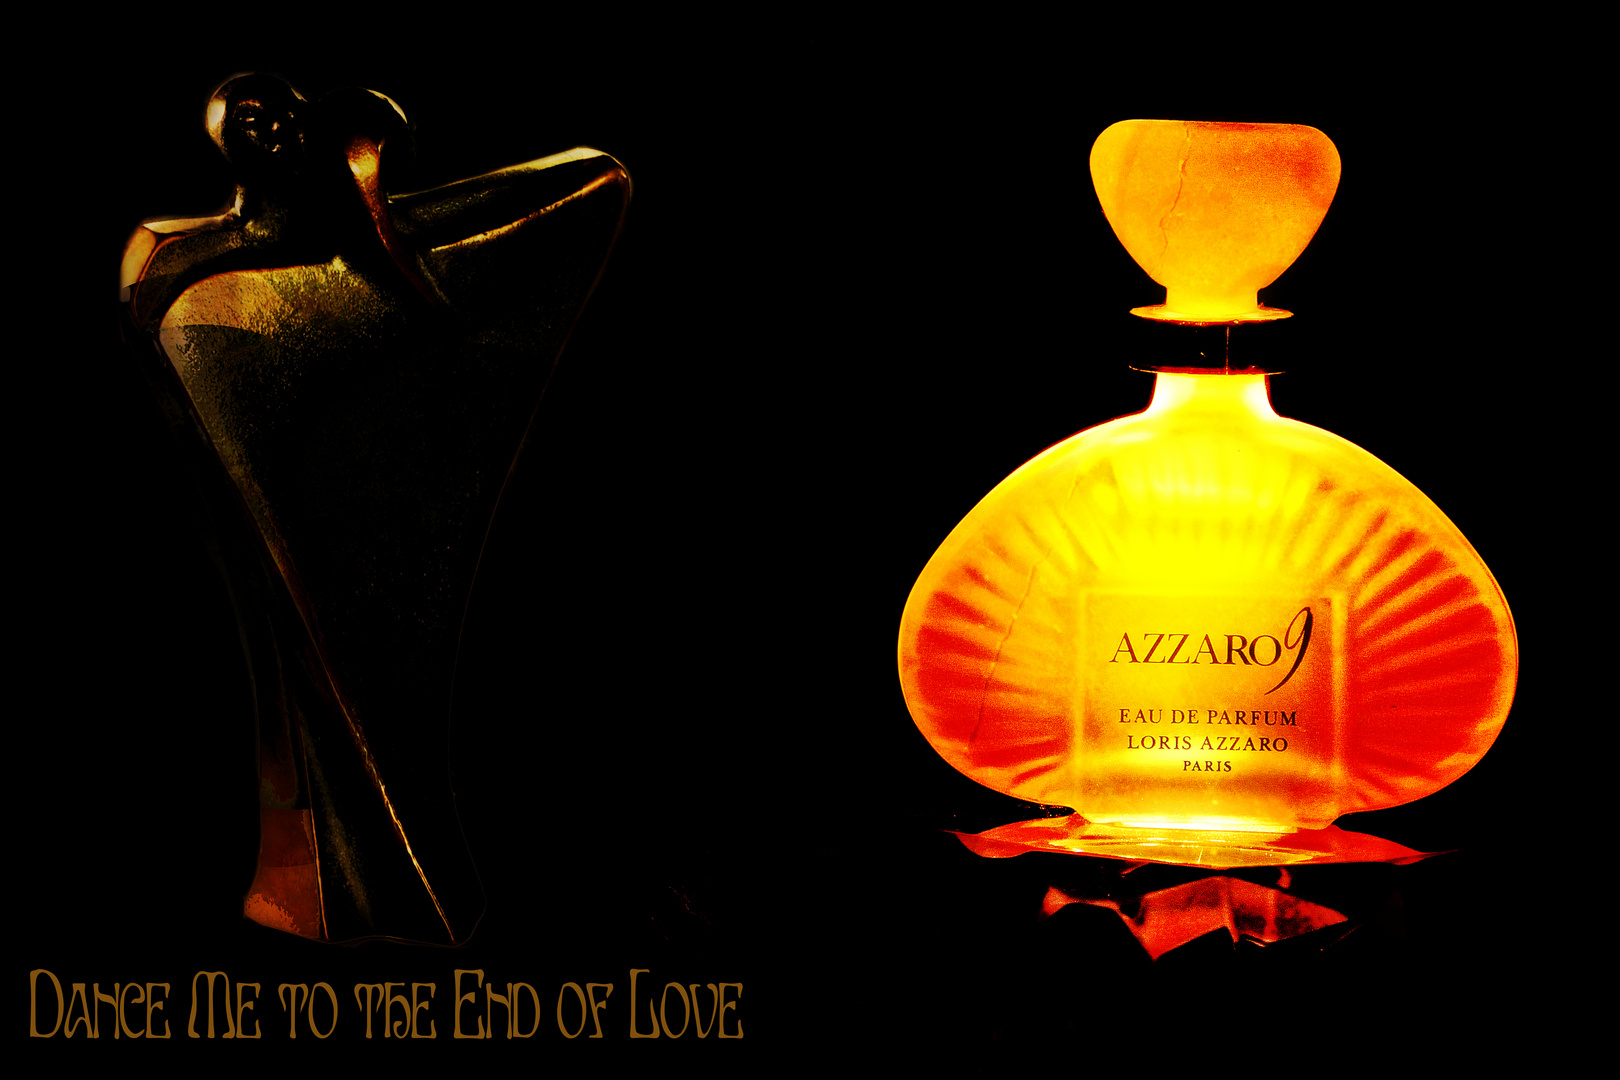 Collage AZZARO 9 - Dance Me to the End of Love